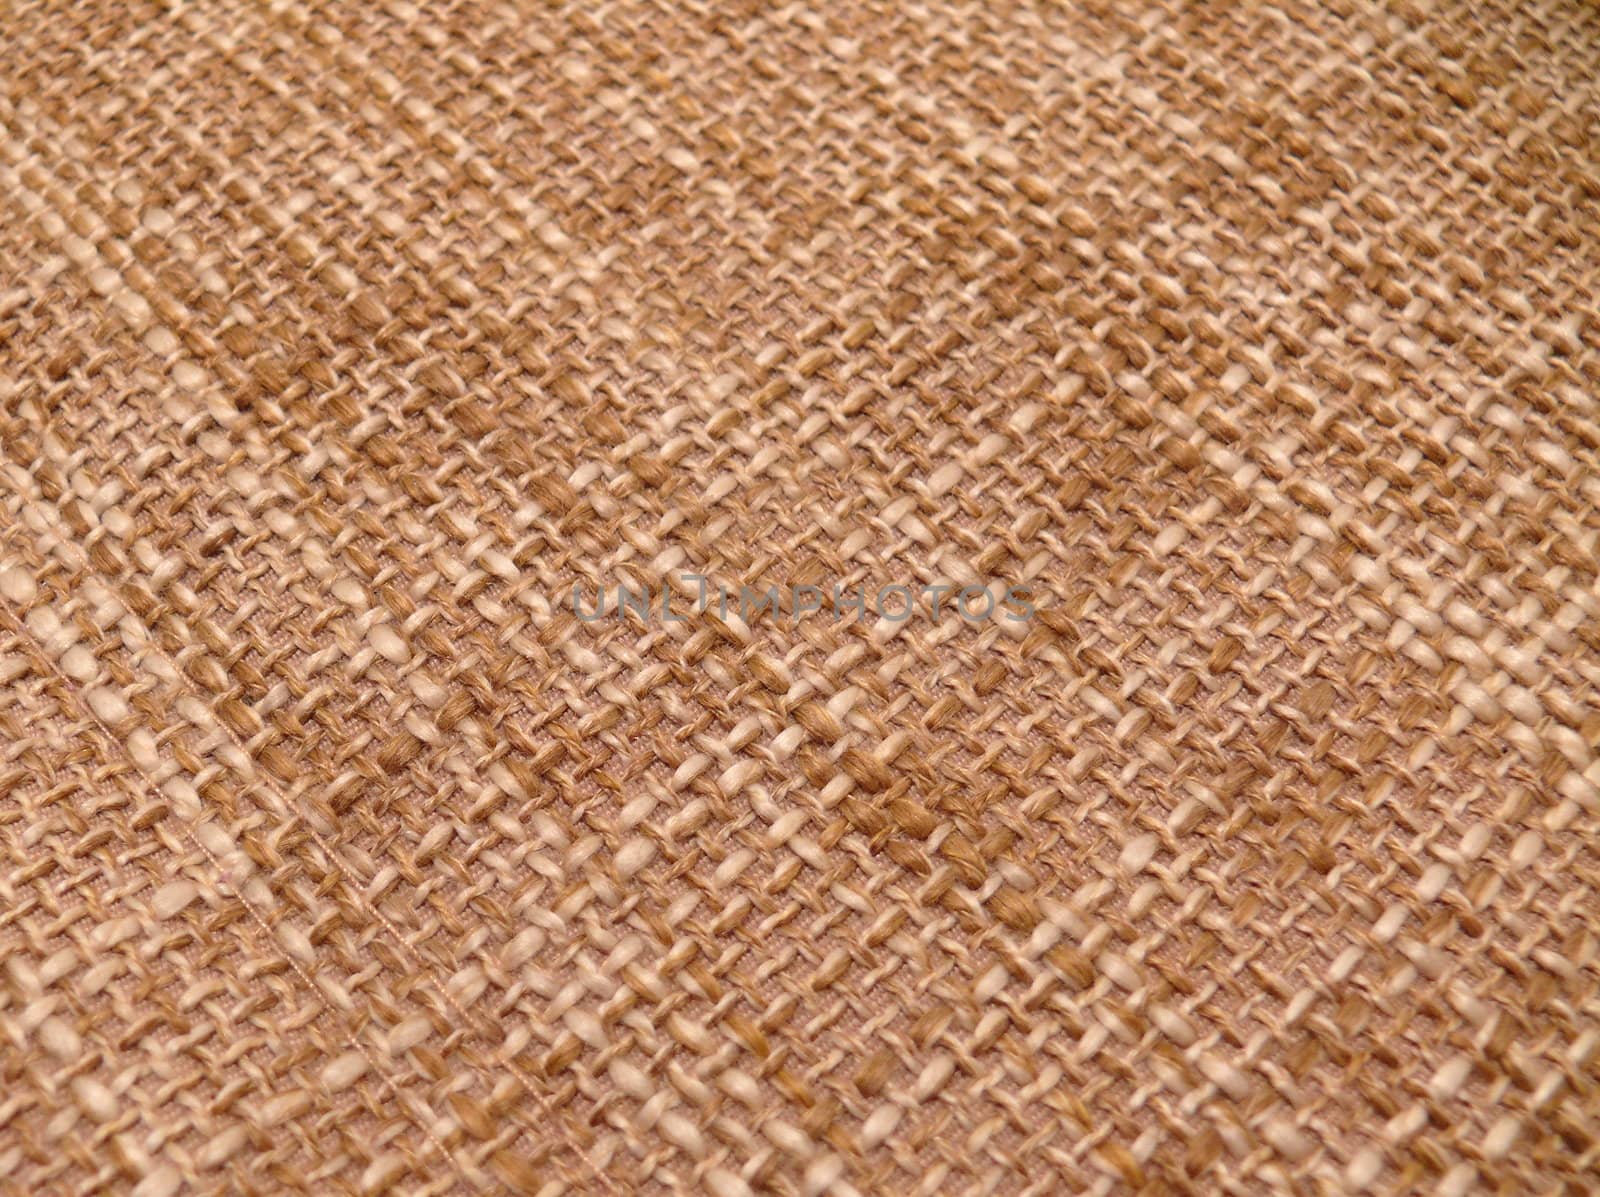 texture of a burlap by Stoyanov